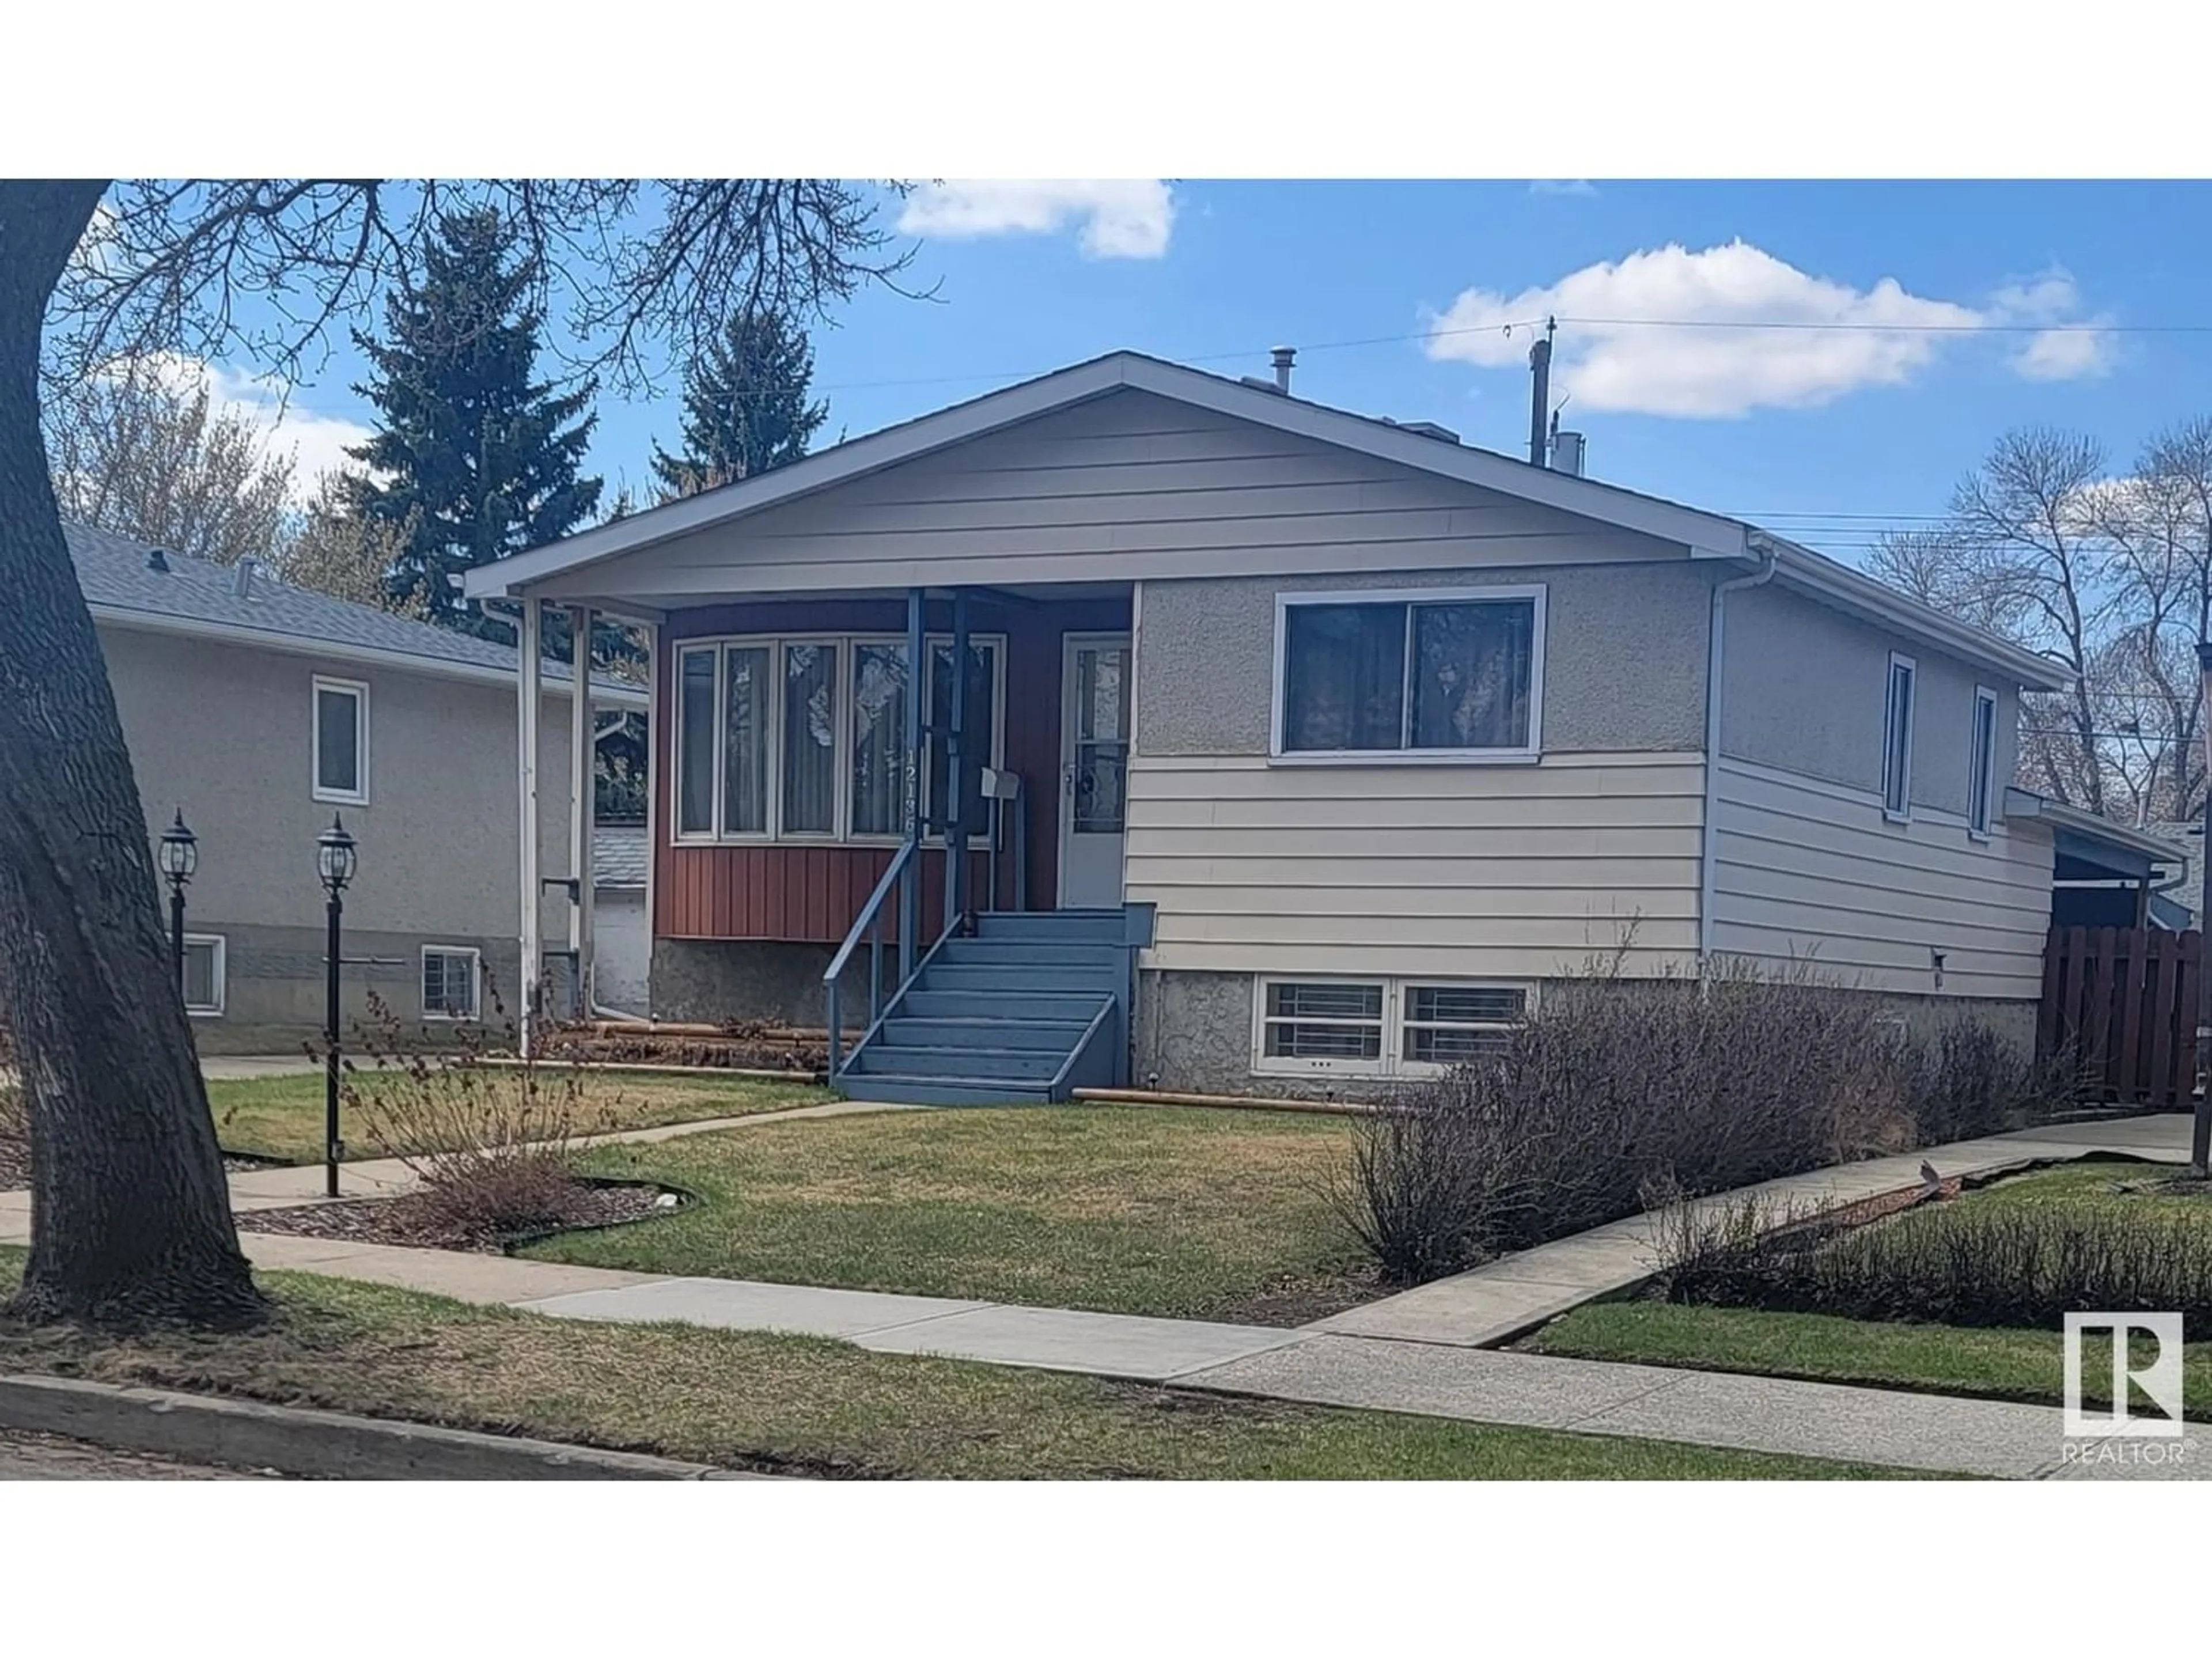 Home with vinyl exterior material for 12136 38 ST NW NW, Edmonton Alberta T5W2J1